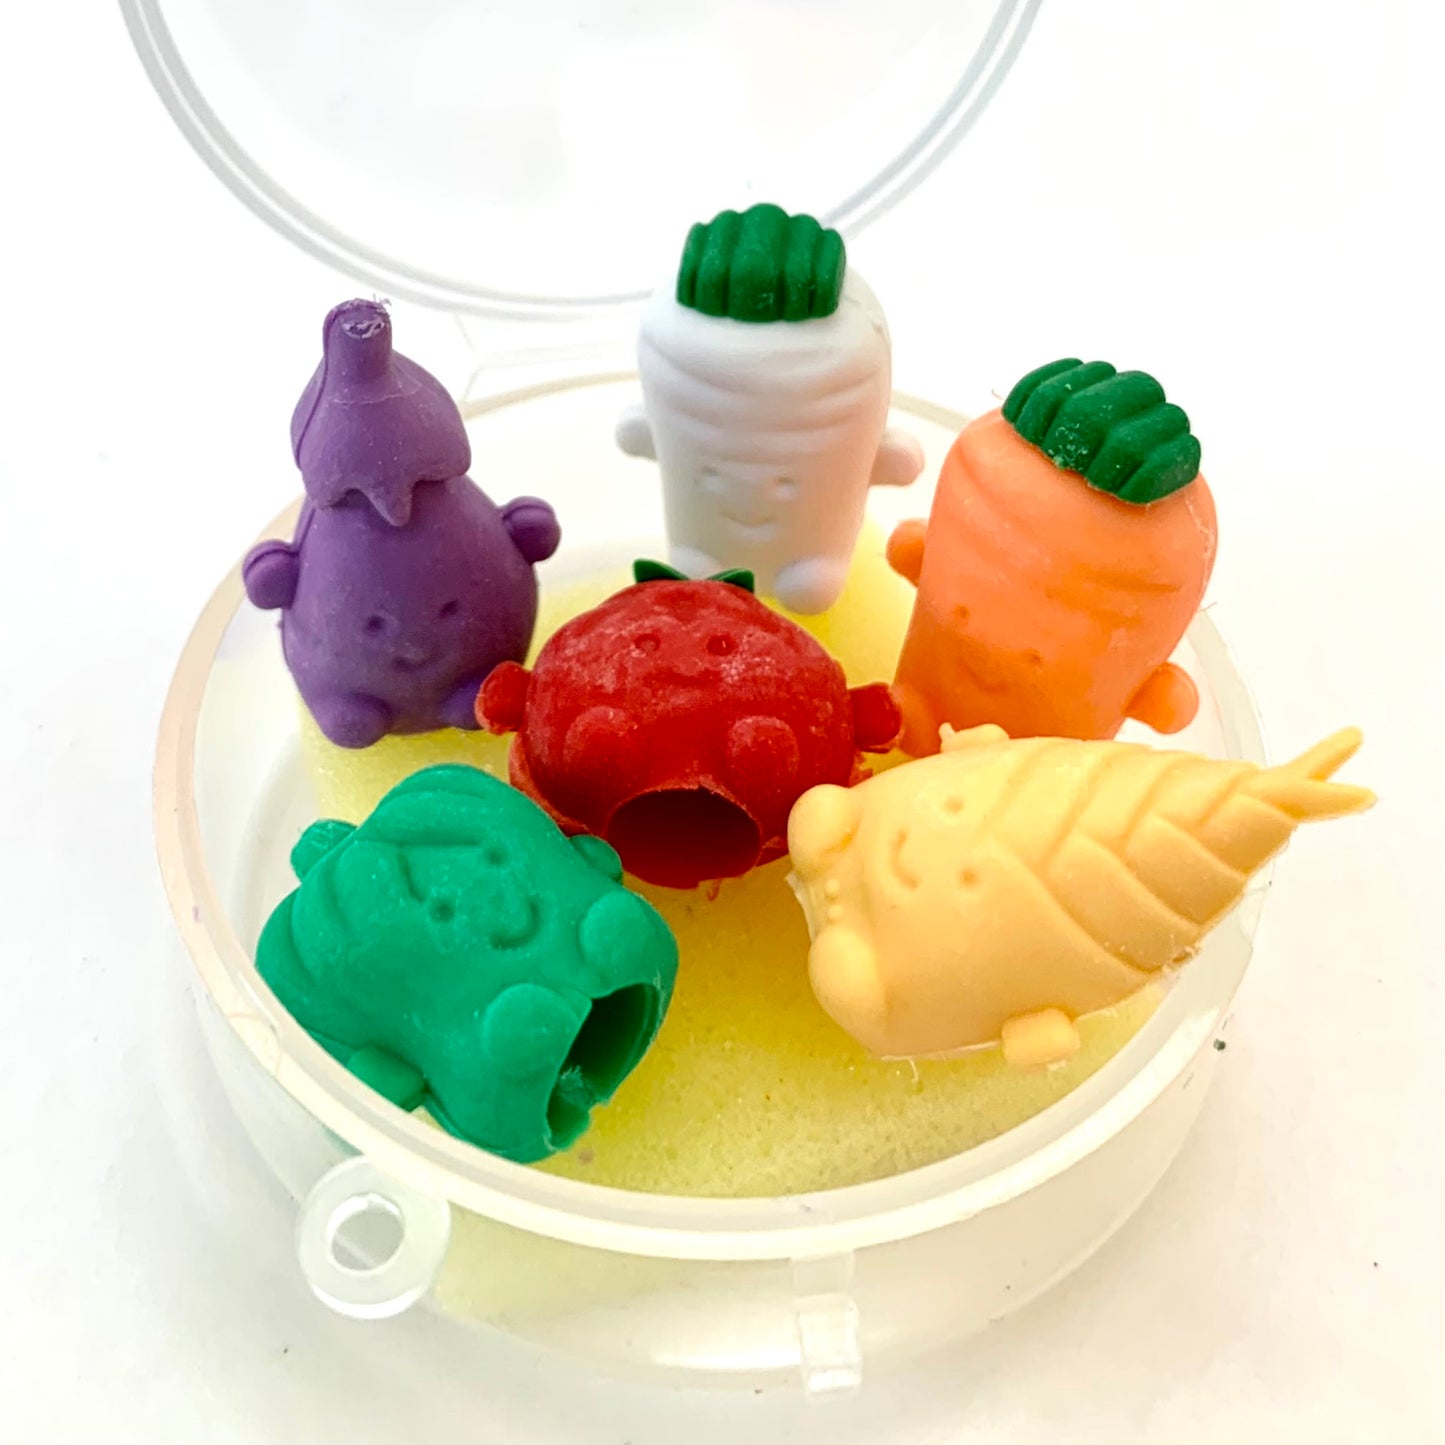 X 38402 VEGETABLE PENCIL TOP ERASERS ROUND BOX-DISCONTINUED